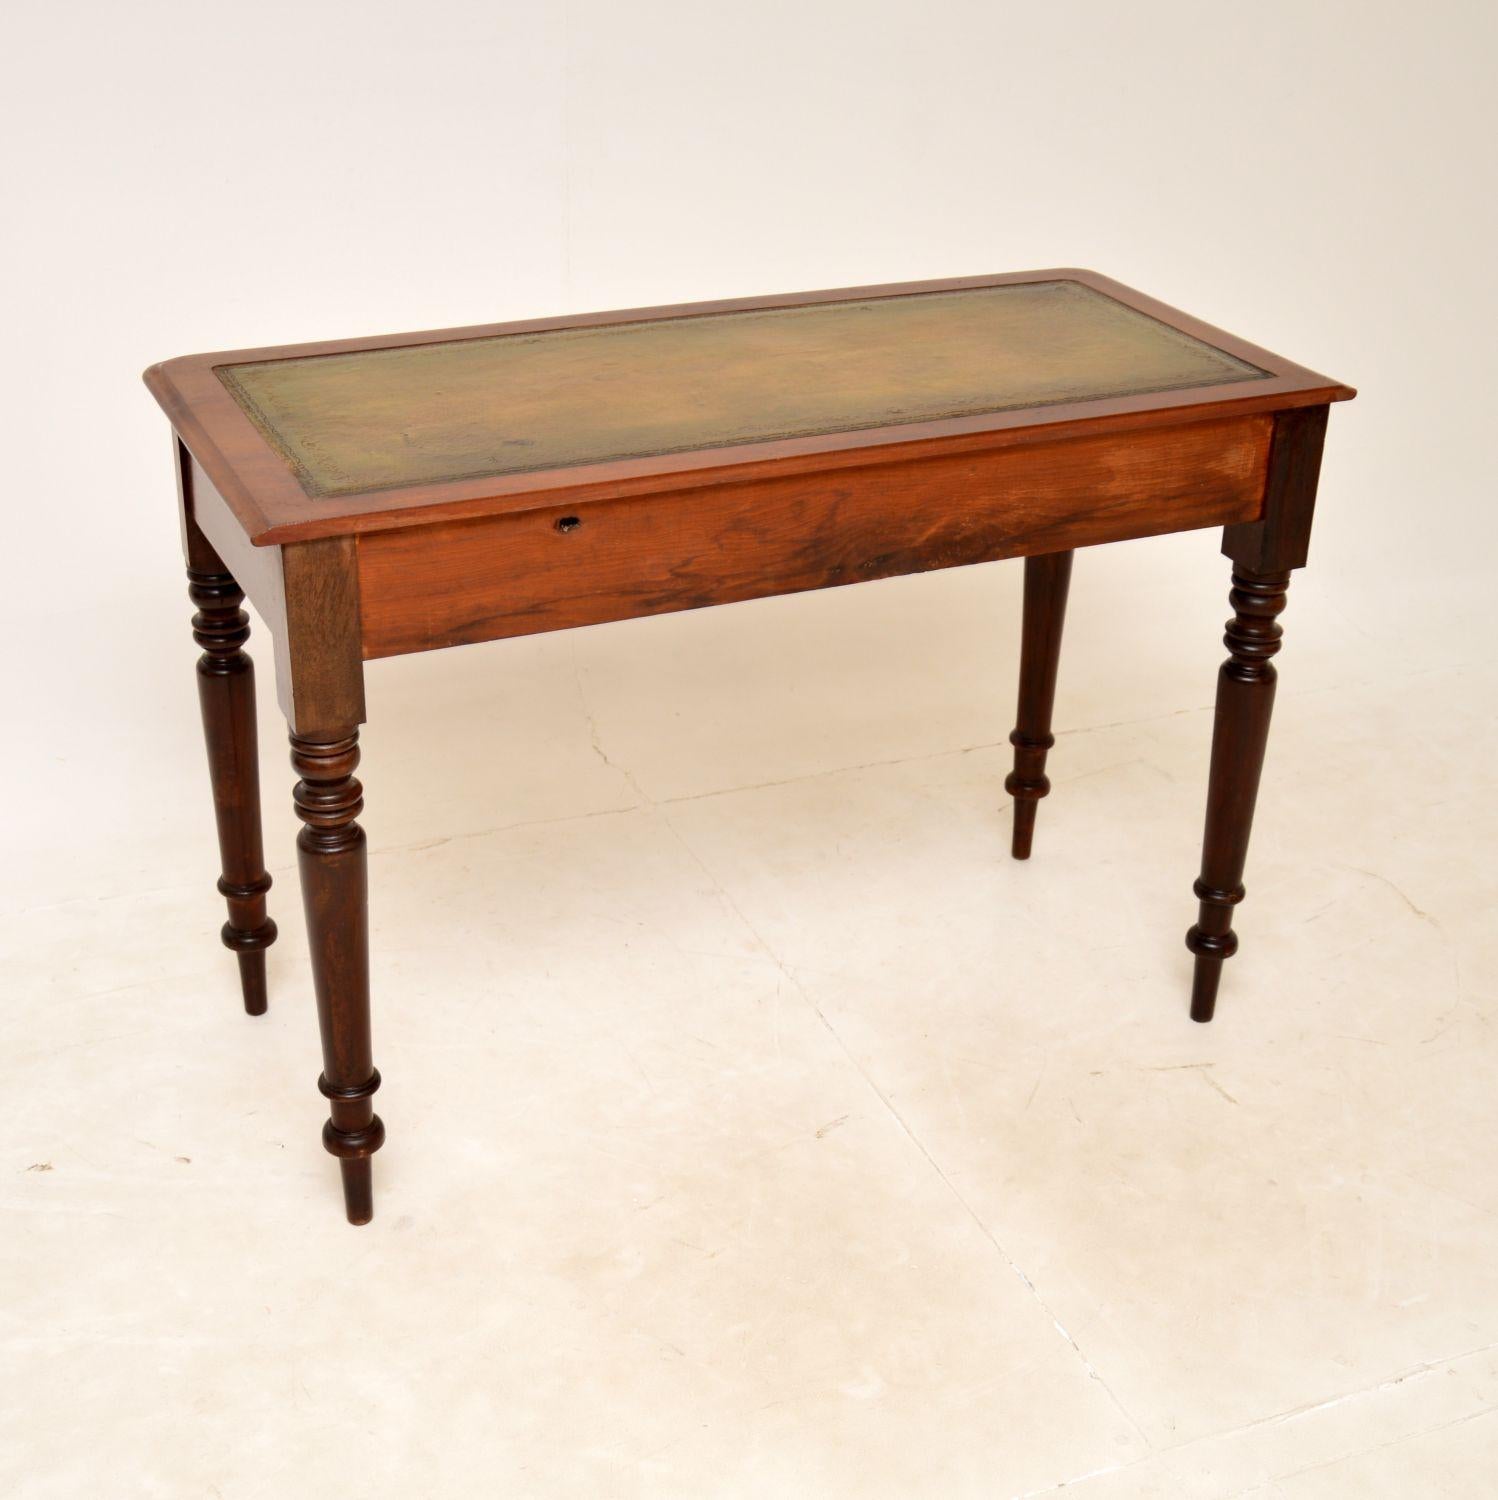 British Antique Victorian Leather Top Writing Table / Desk